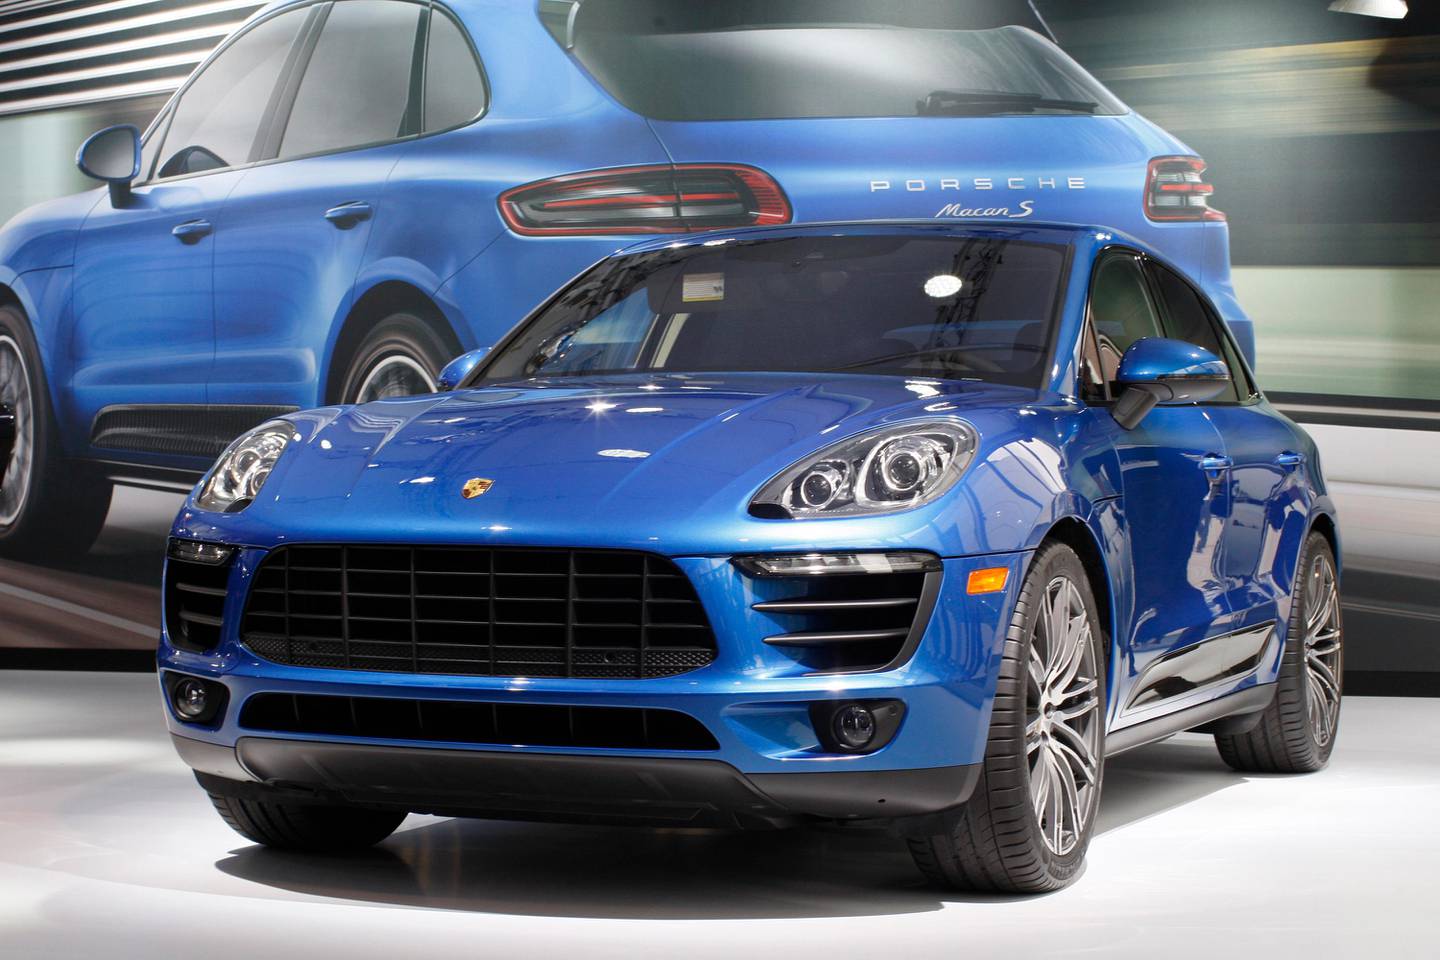 LOS ANGELES, CA - NOVEMBER 20: A Porsche Macan S is shown during media preview days at the 2013 Los Angeles Auto Show on November 20, 2013 in Los Angeles, California. The LA Auto Show was founded in 1907 and is one of the largest with more than 20 world debuts expected. The show will be open to the public November 22 through December 1.   David McNew/Getty Images/AFP
== FOR NEWSPAPERS, INTERNET, TELCOS & TELEVISION USE ONLY ==